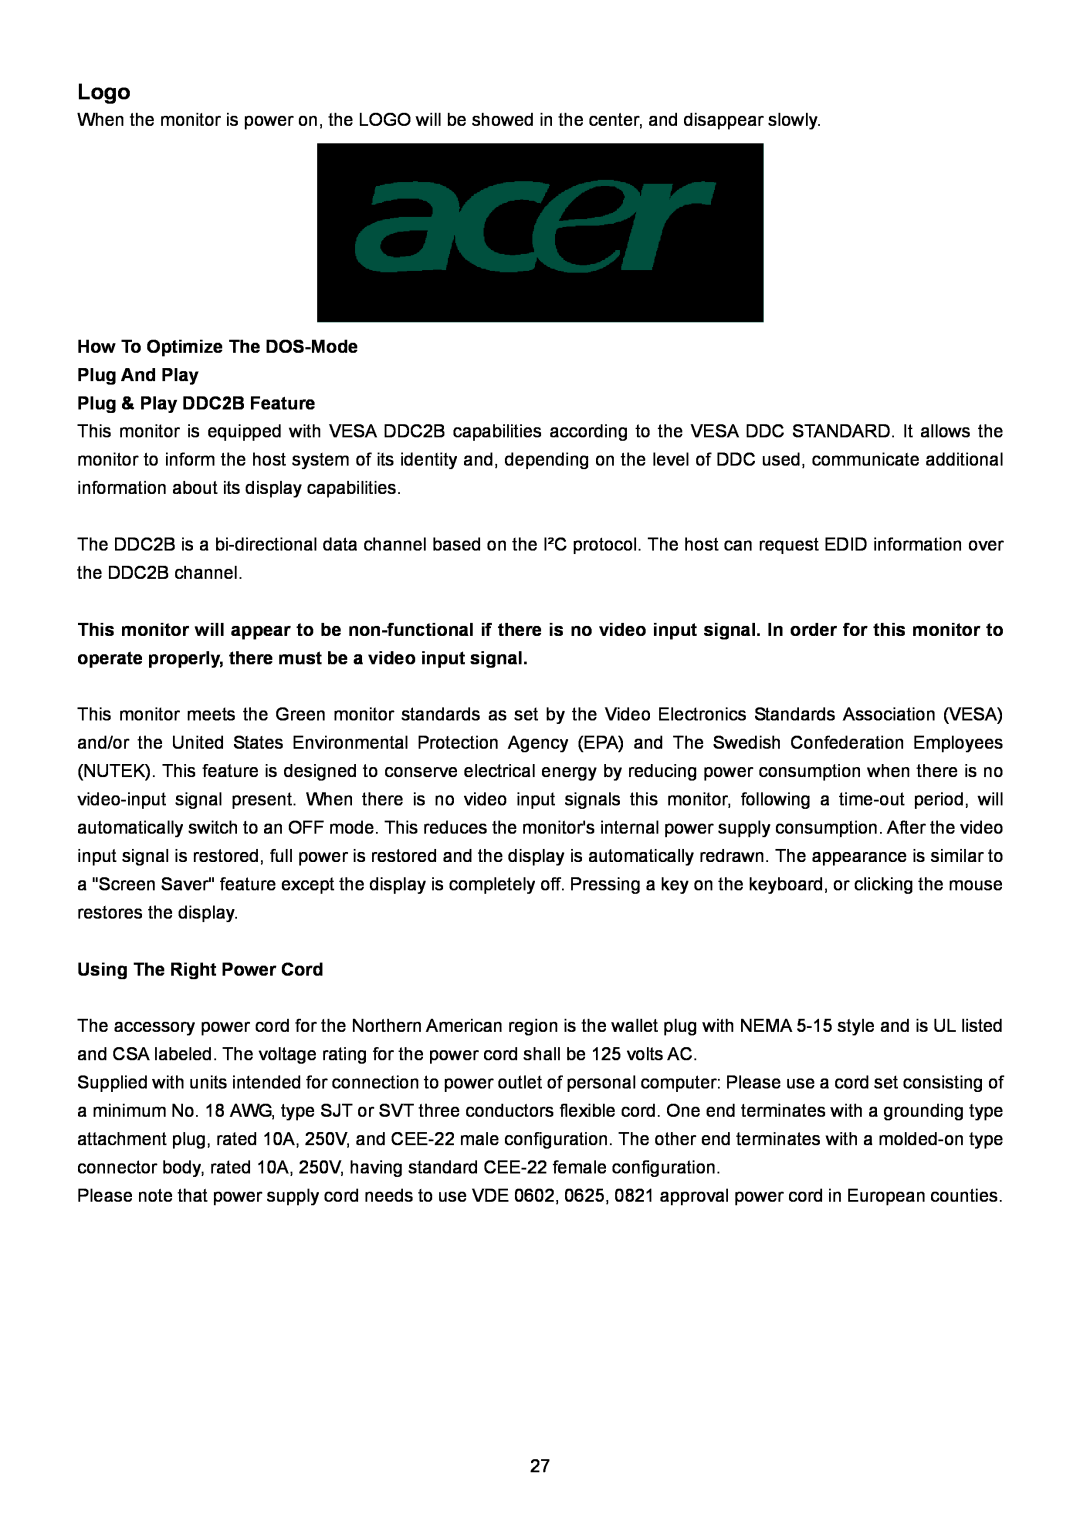 Acer B243W manual Logo, How To Optimize The DOS-Mode Plug And Play Plug & Play DDC2B Feature, Using The Right Power Cord 